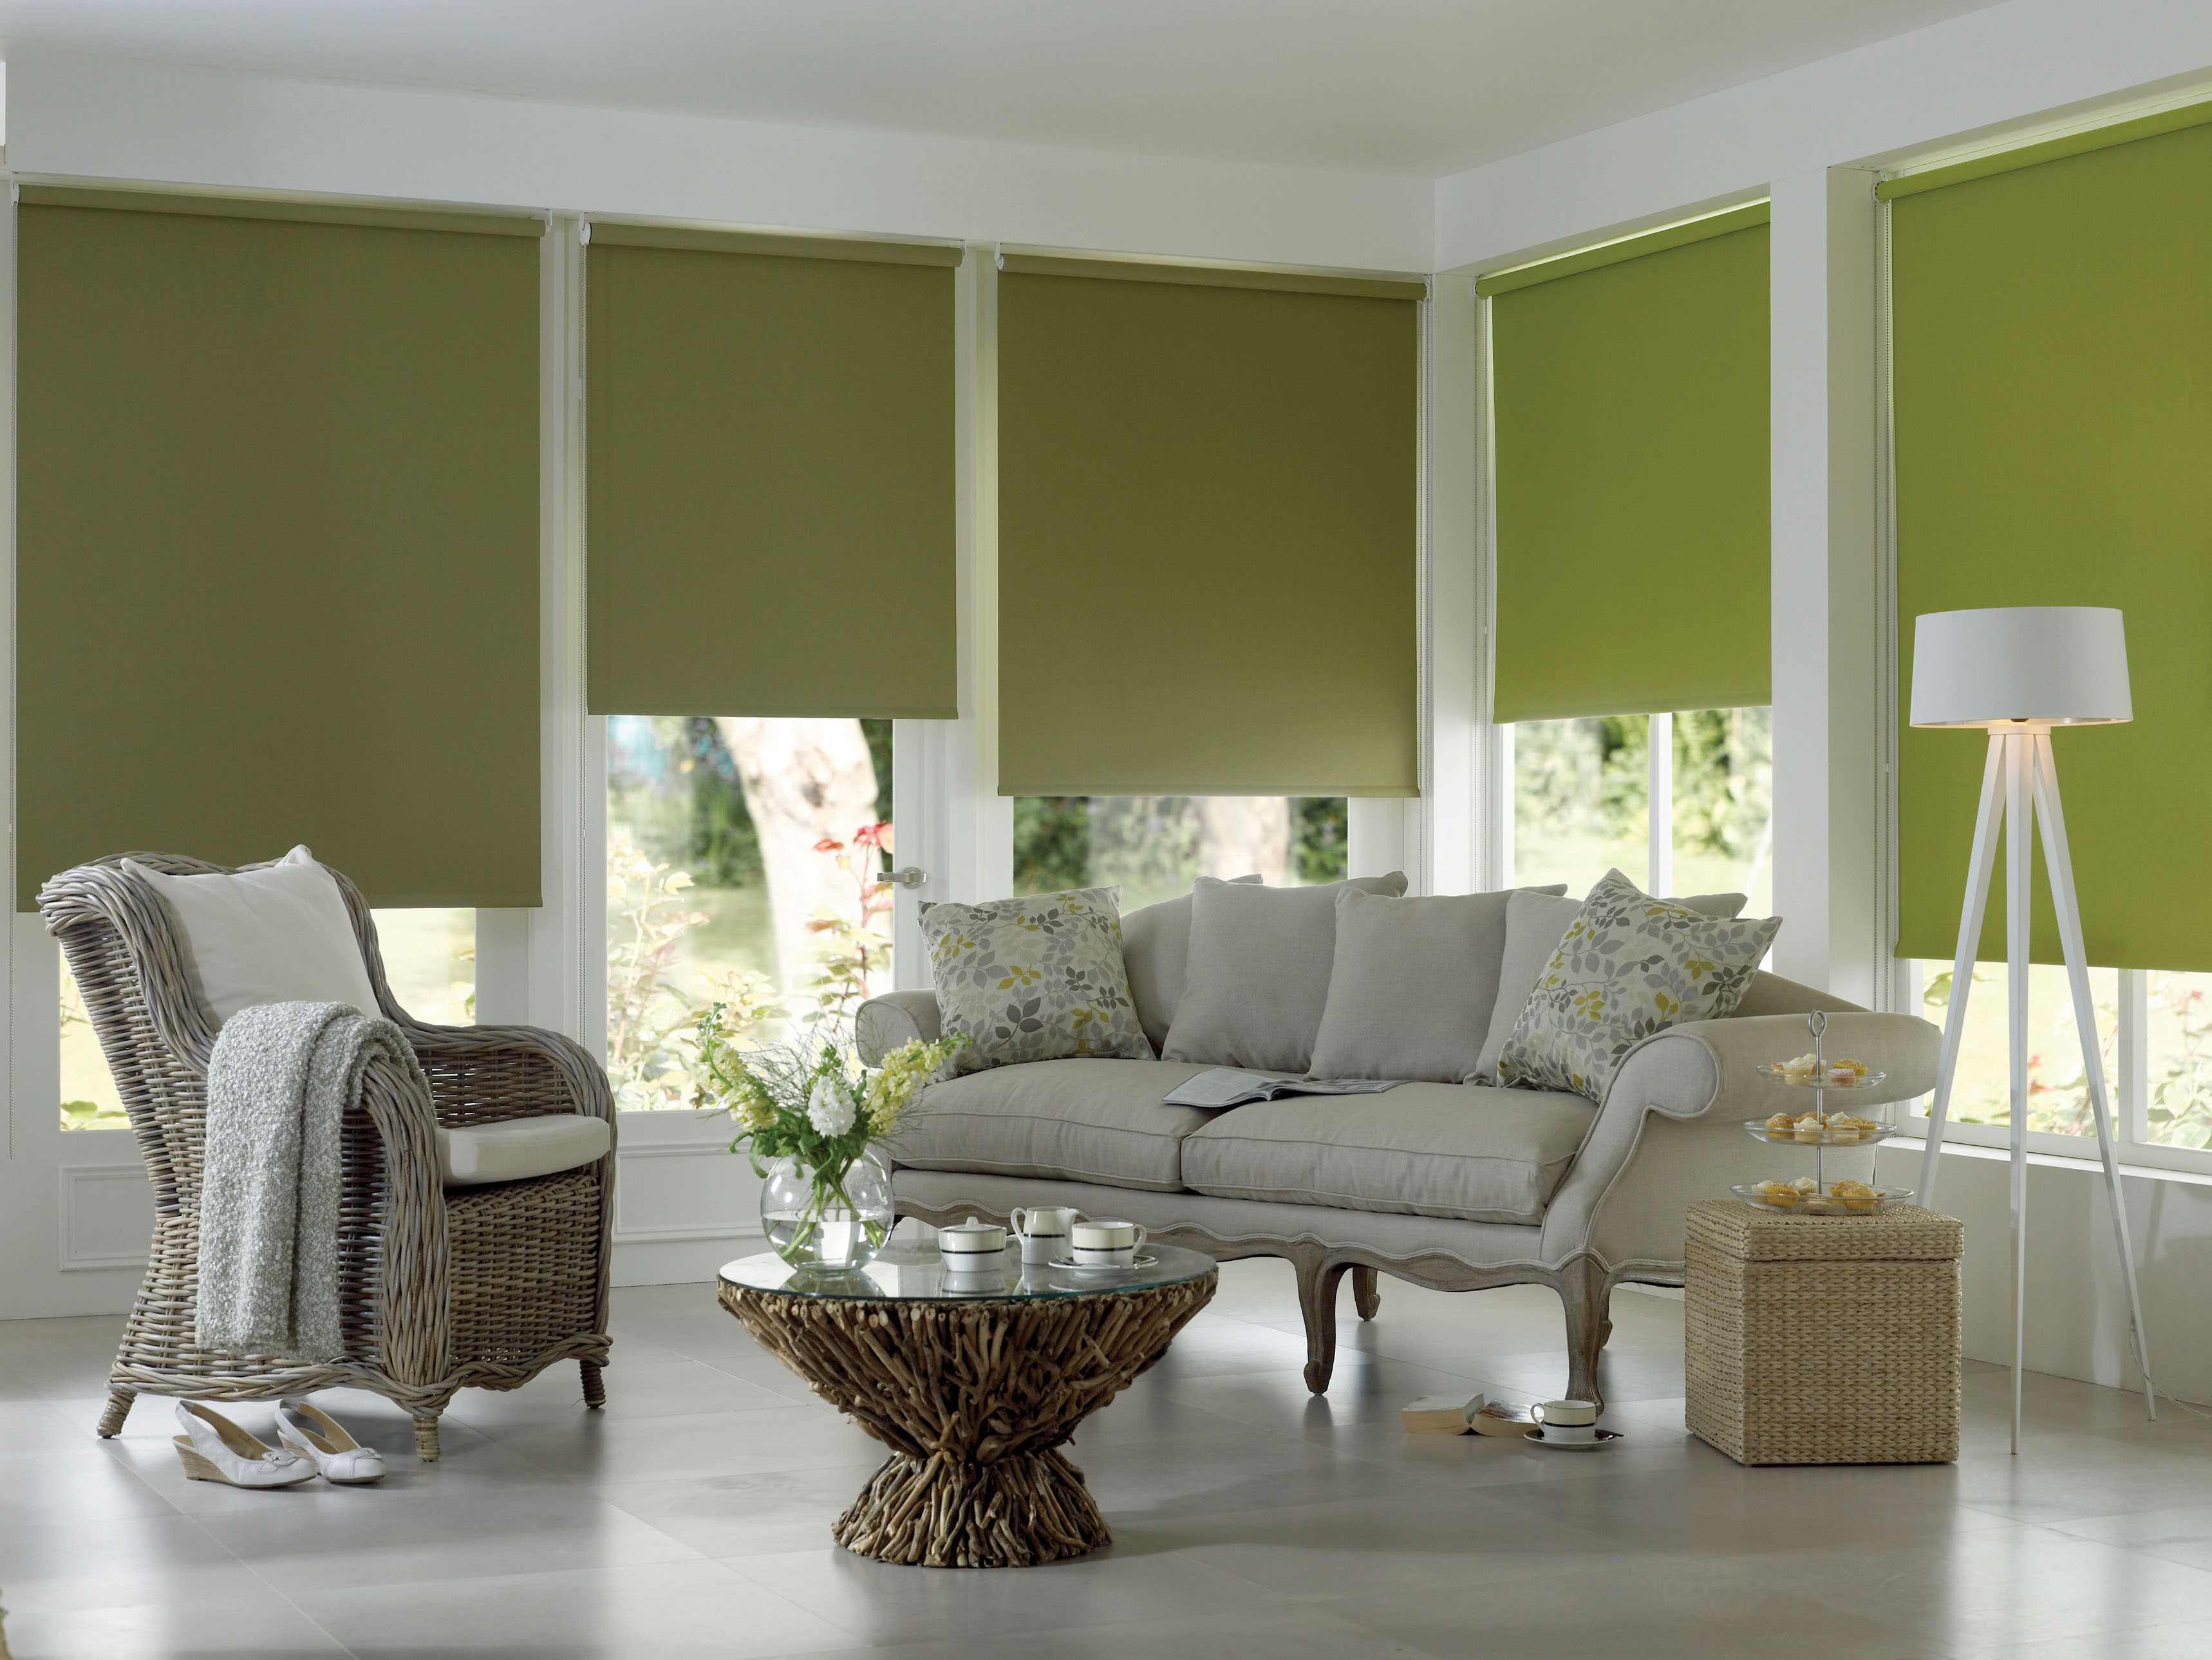 the idea of ​​a bright living room decor with roman curtains